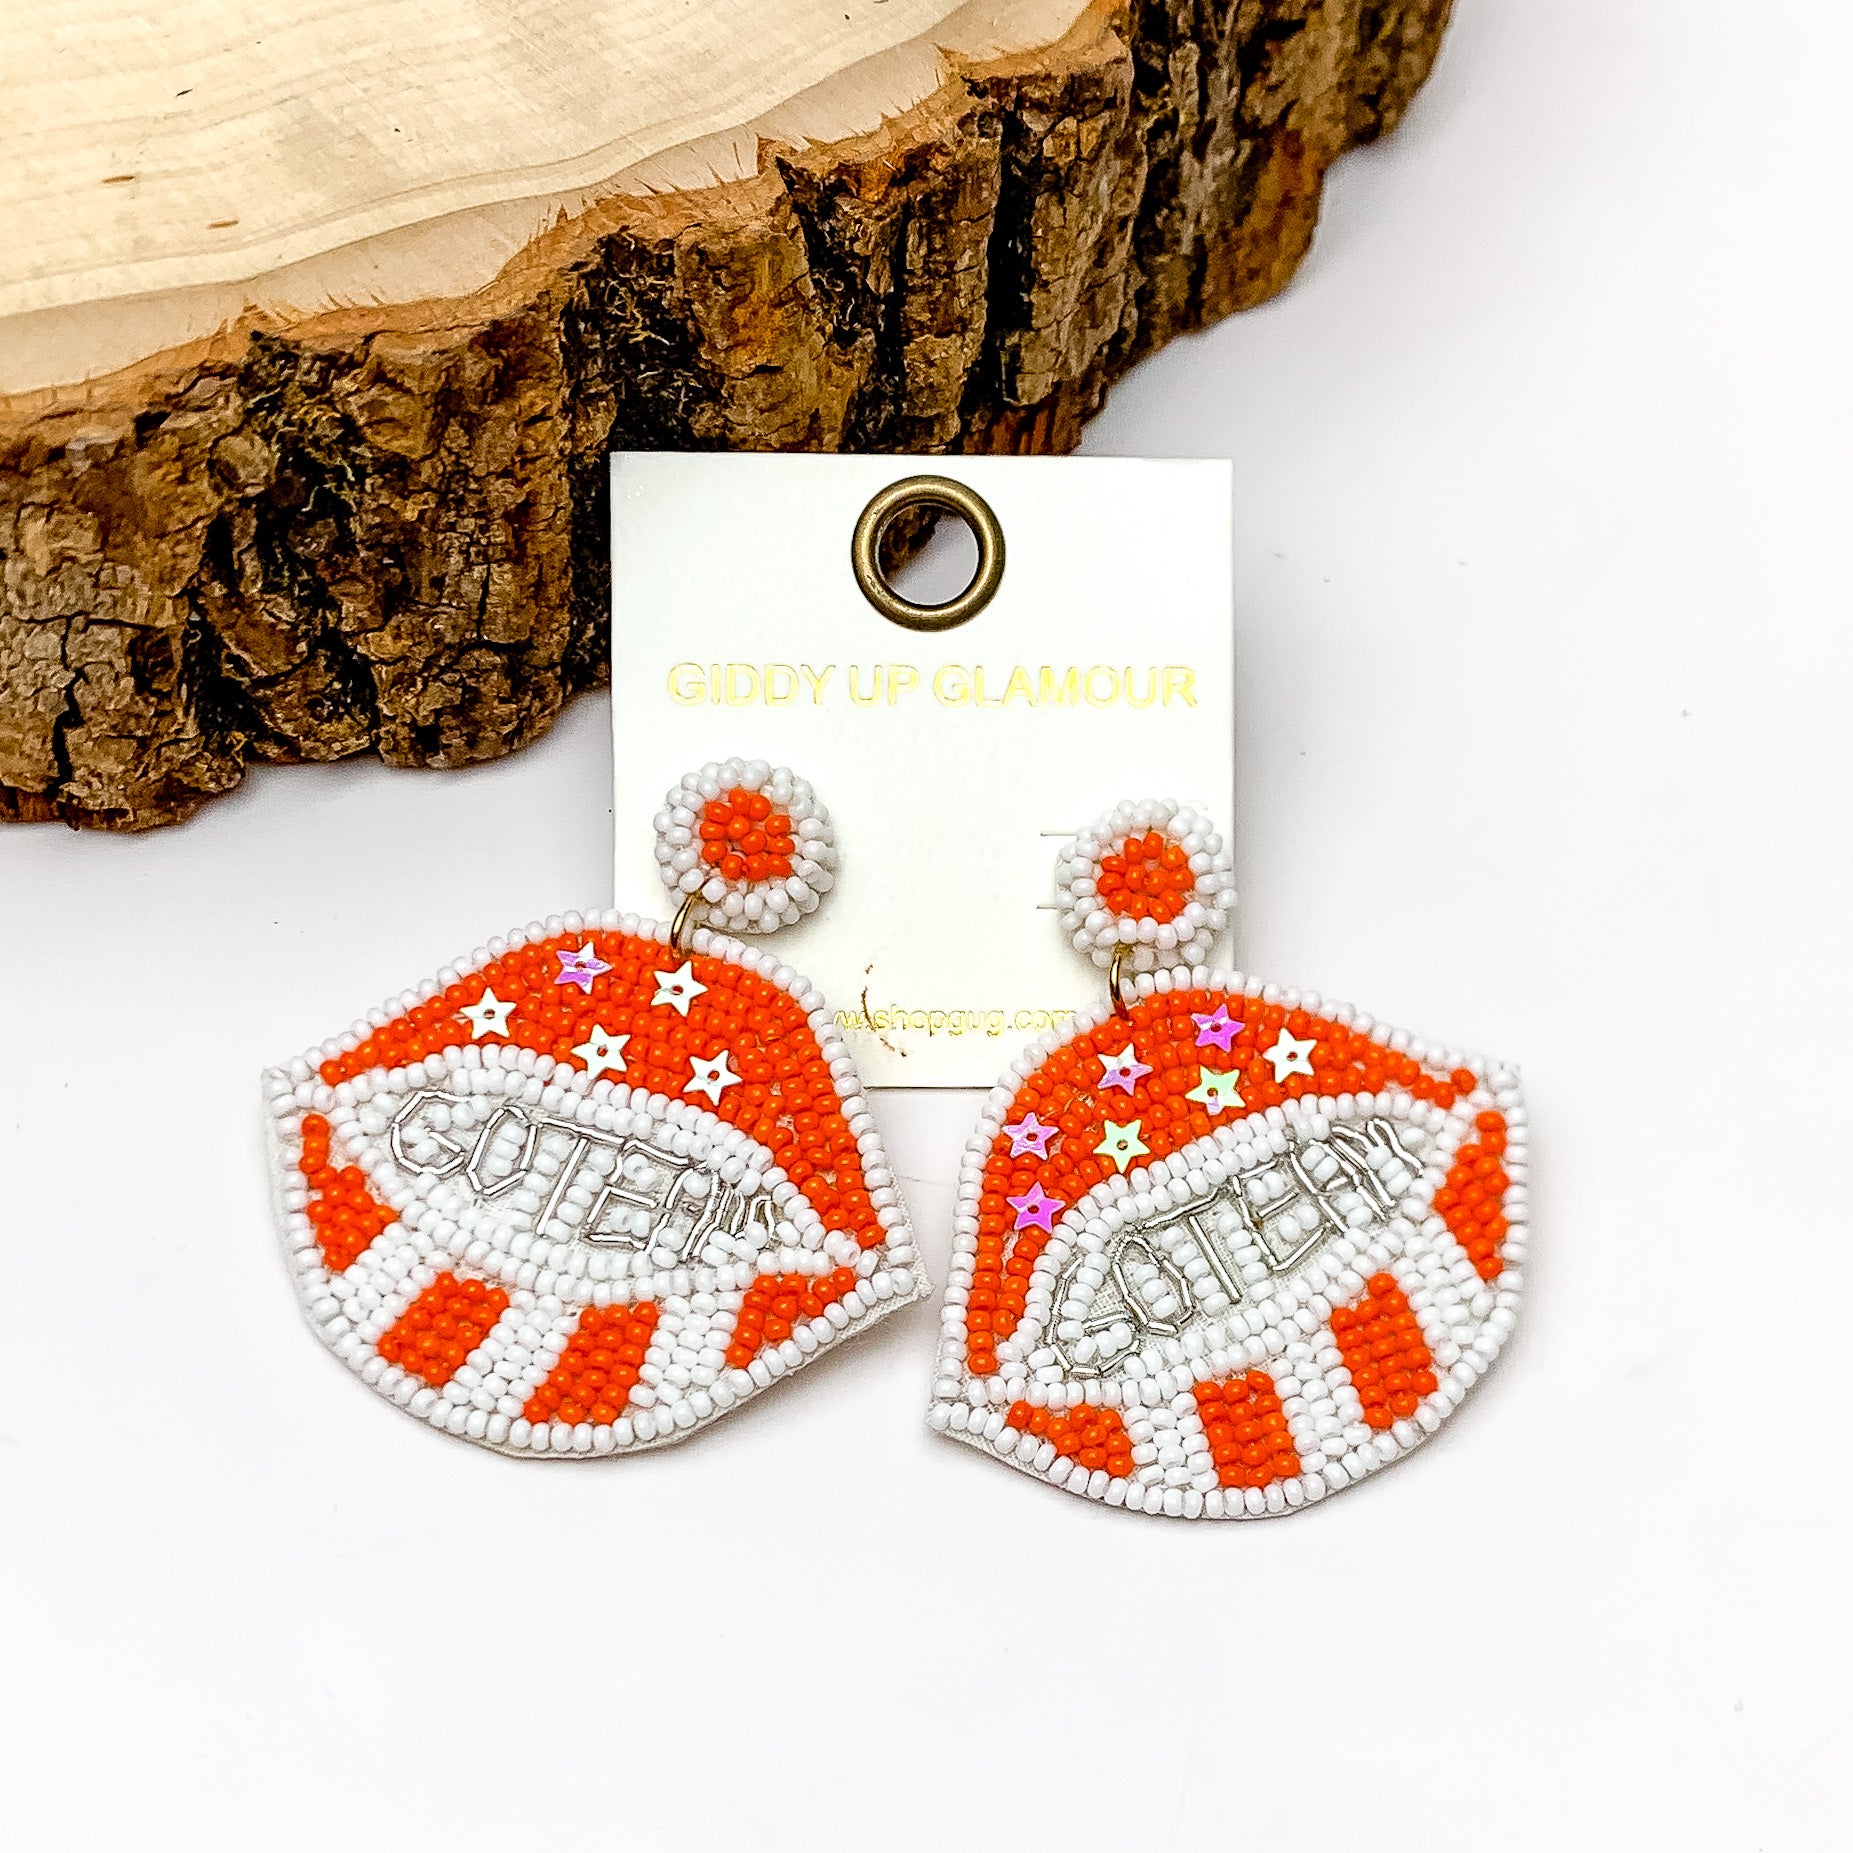 GO TEAM Beaded Lips Post Earrings in Orange and White - Giddy Up Glamour Boutique